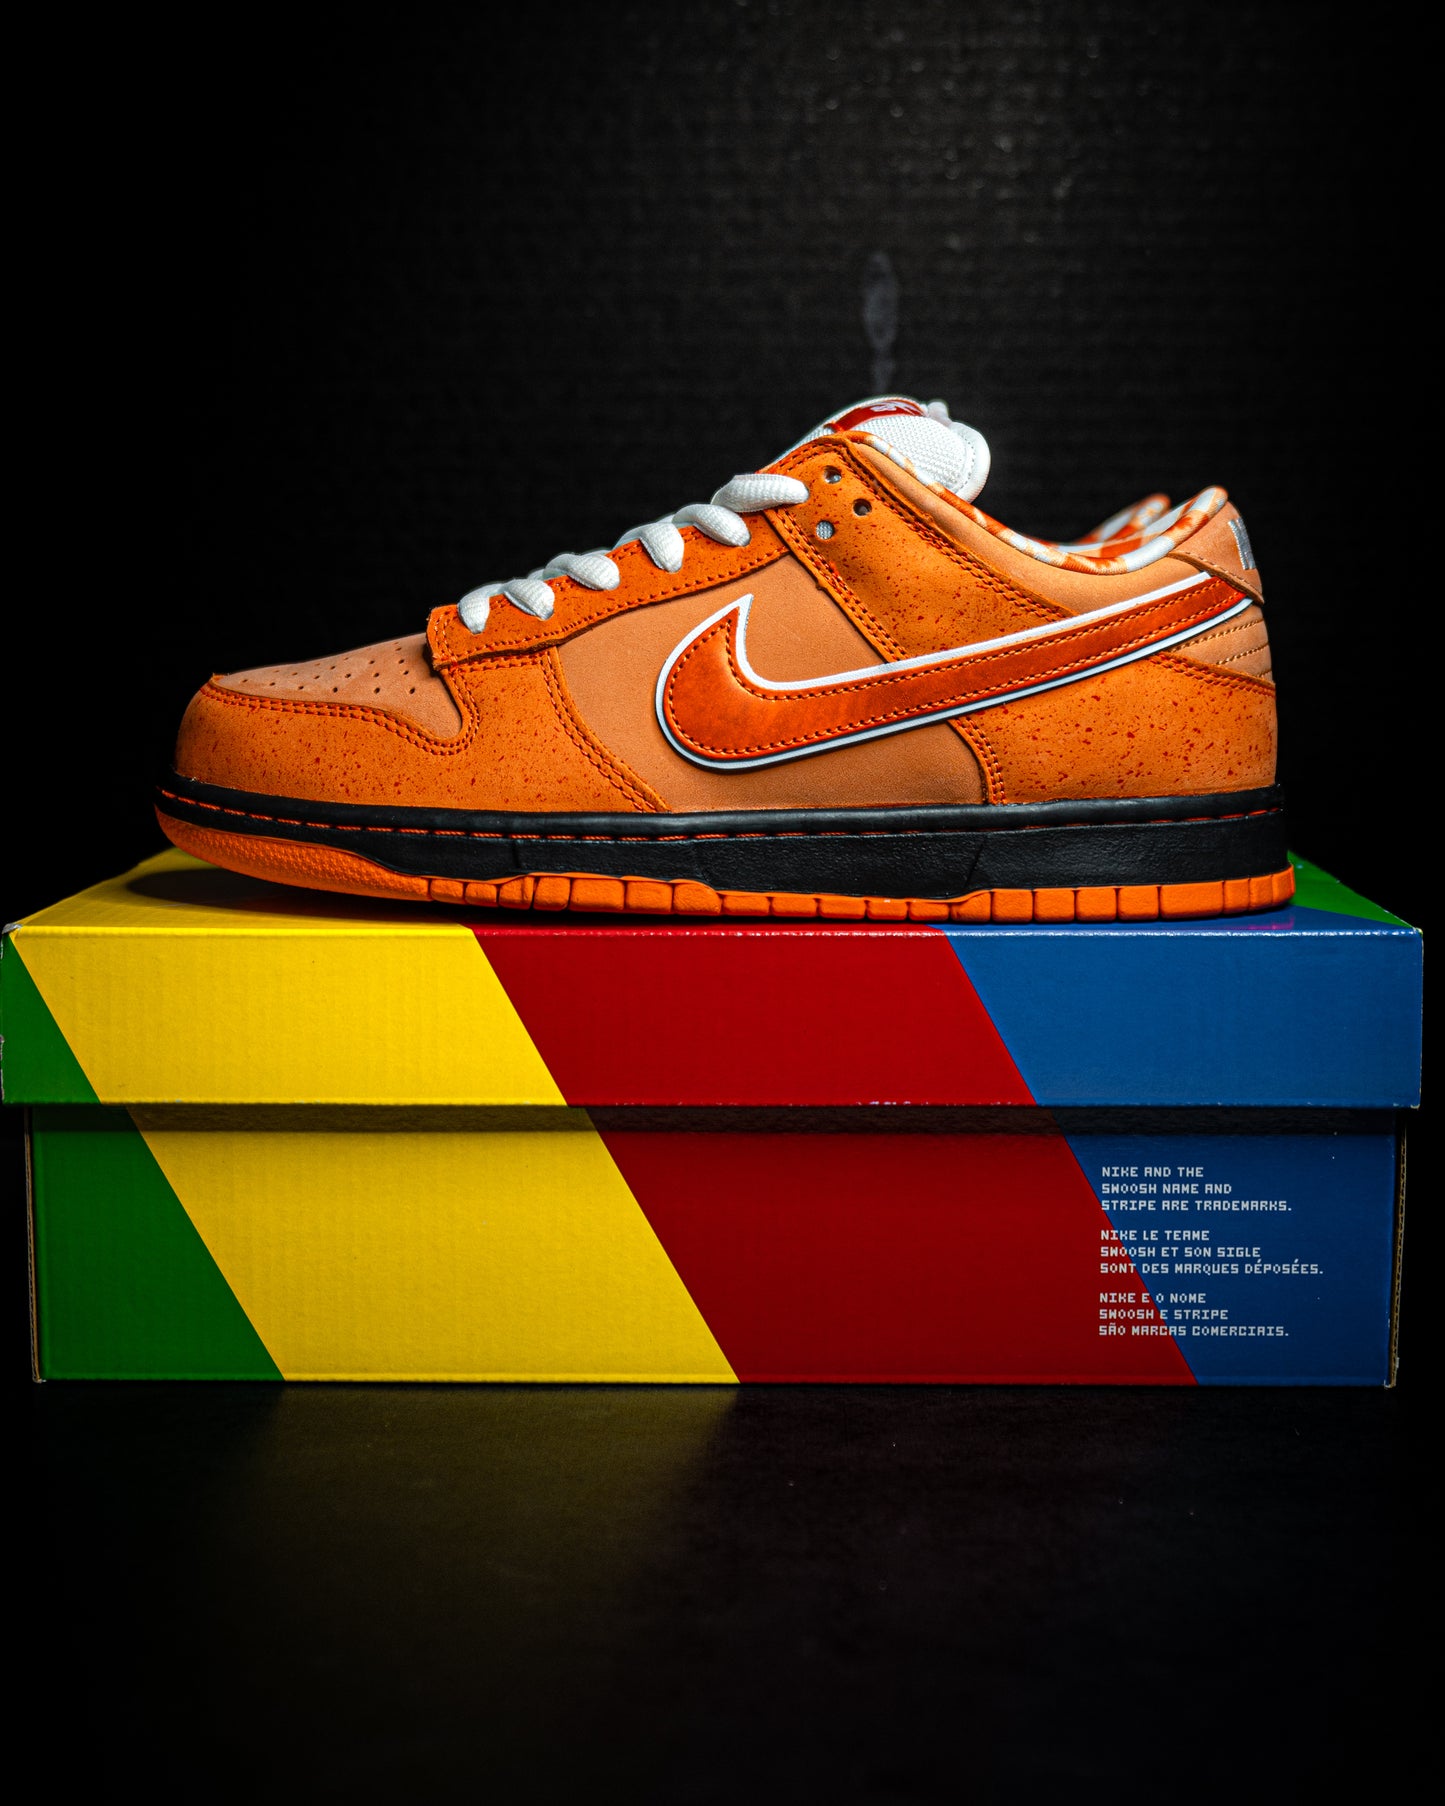 Nike Dunk Low SB x Concepts Orange Lobster (SPECIAL BOX)